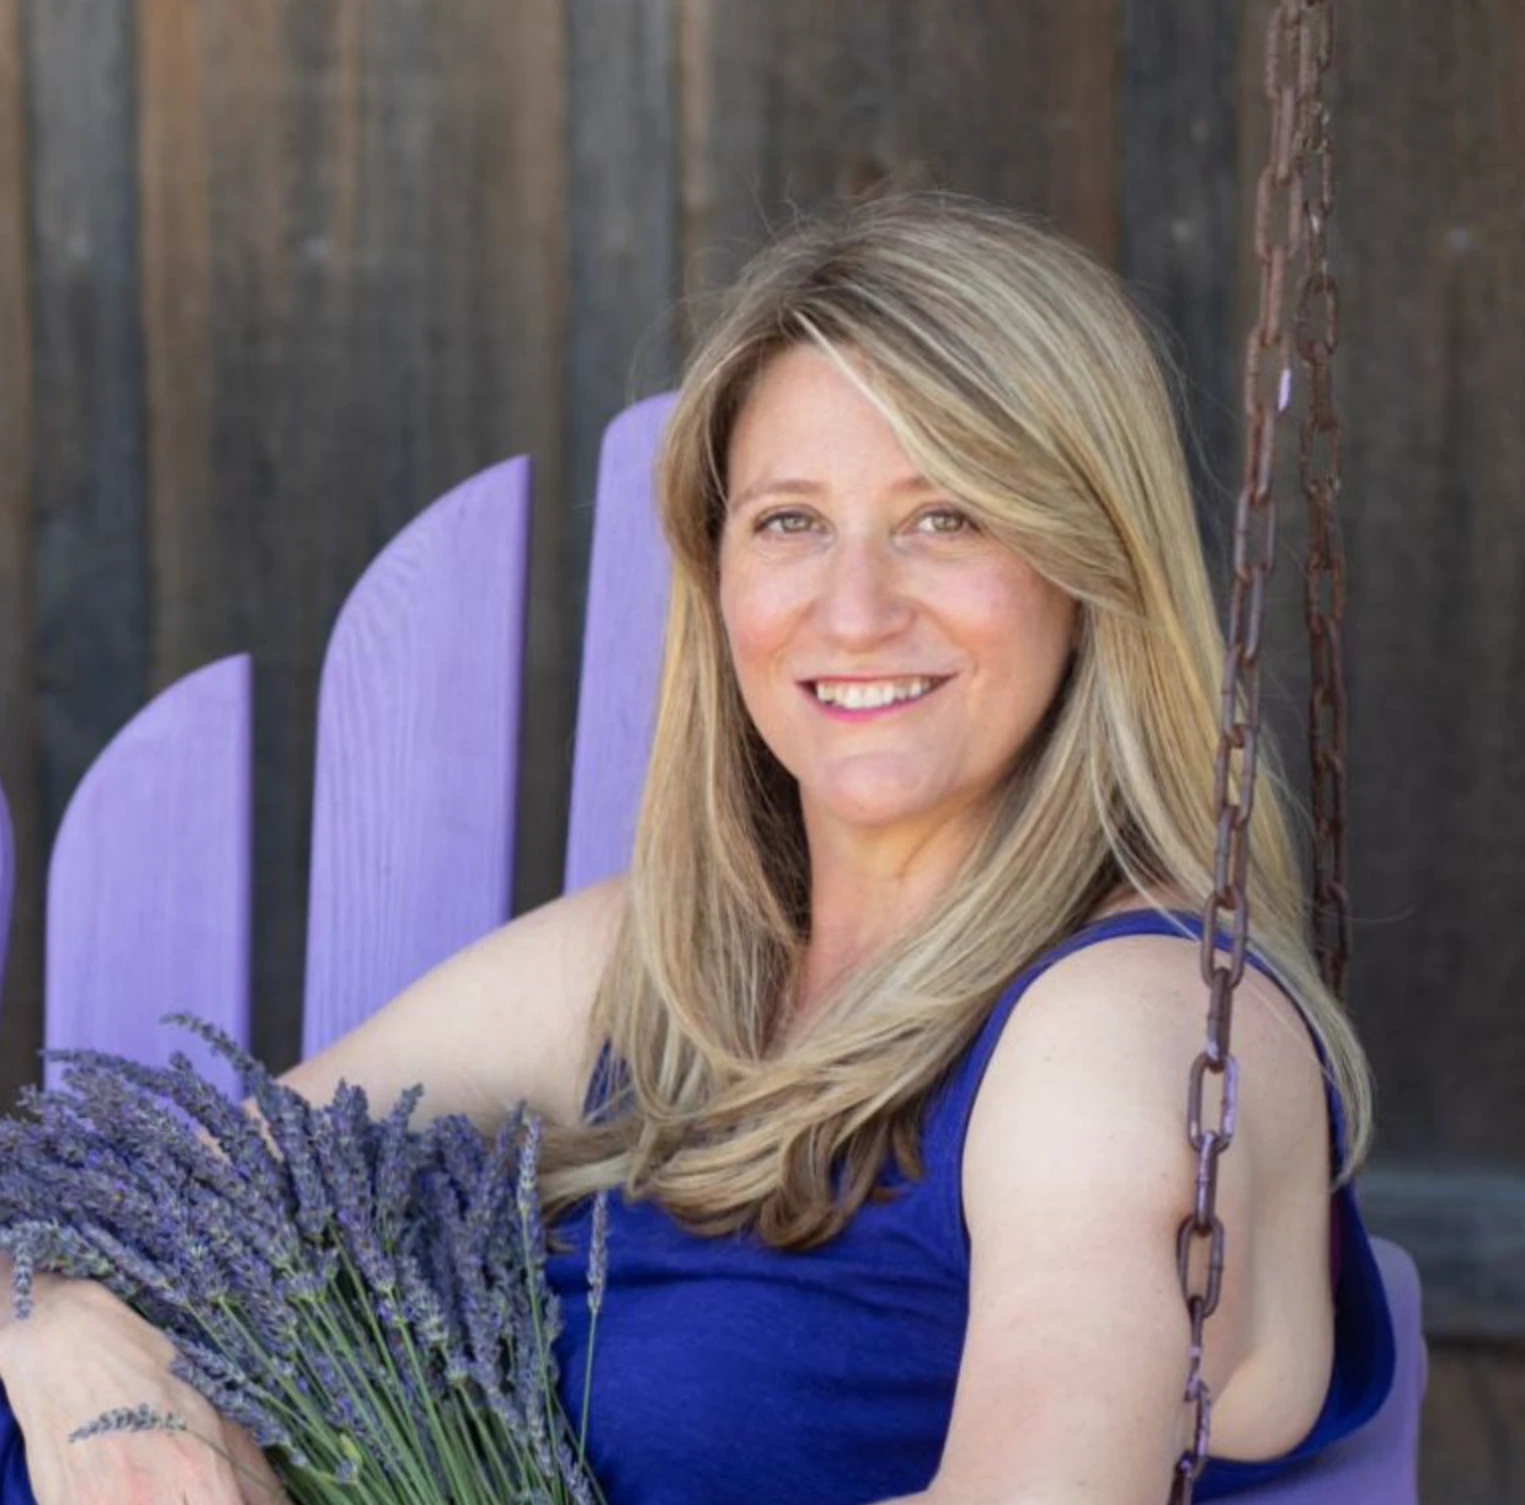 Jodi Cohen is the founder of Vibrant Blue Oils and a Queen of the Thrones affiliate